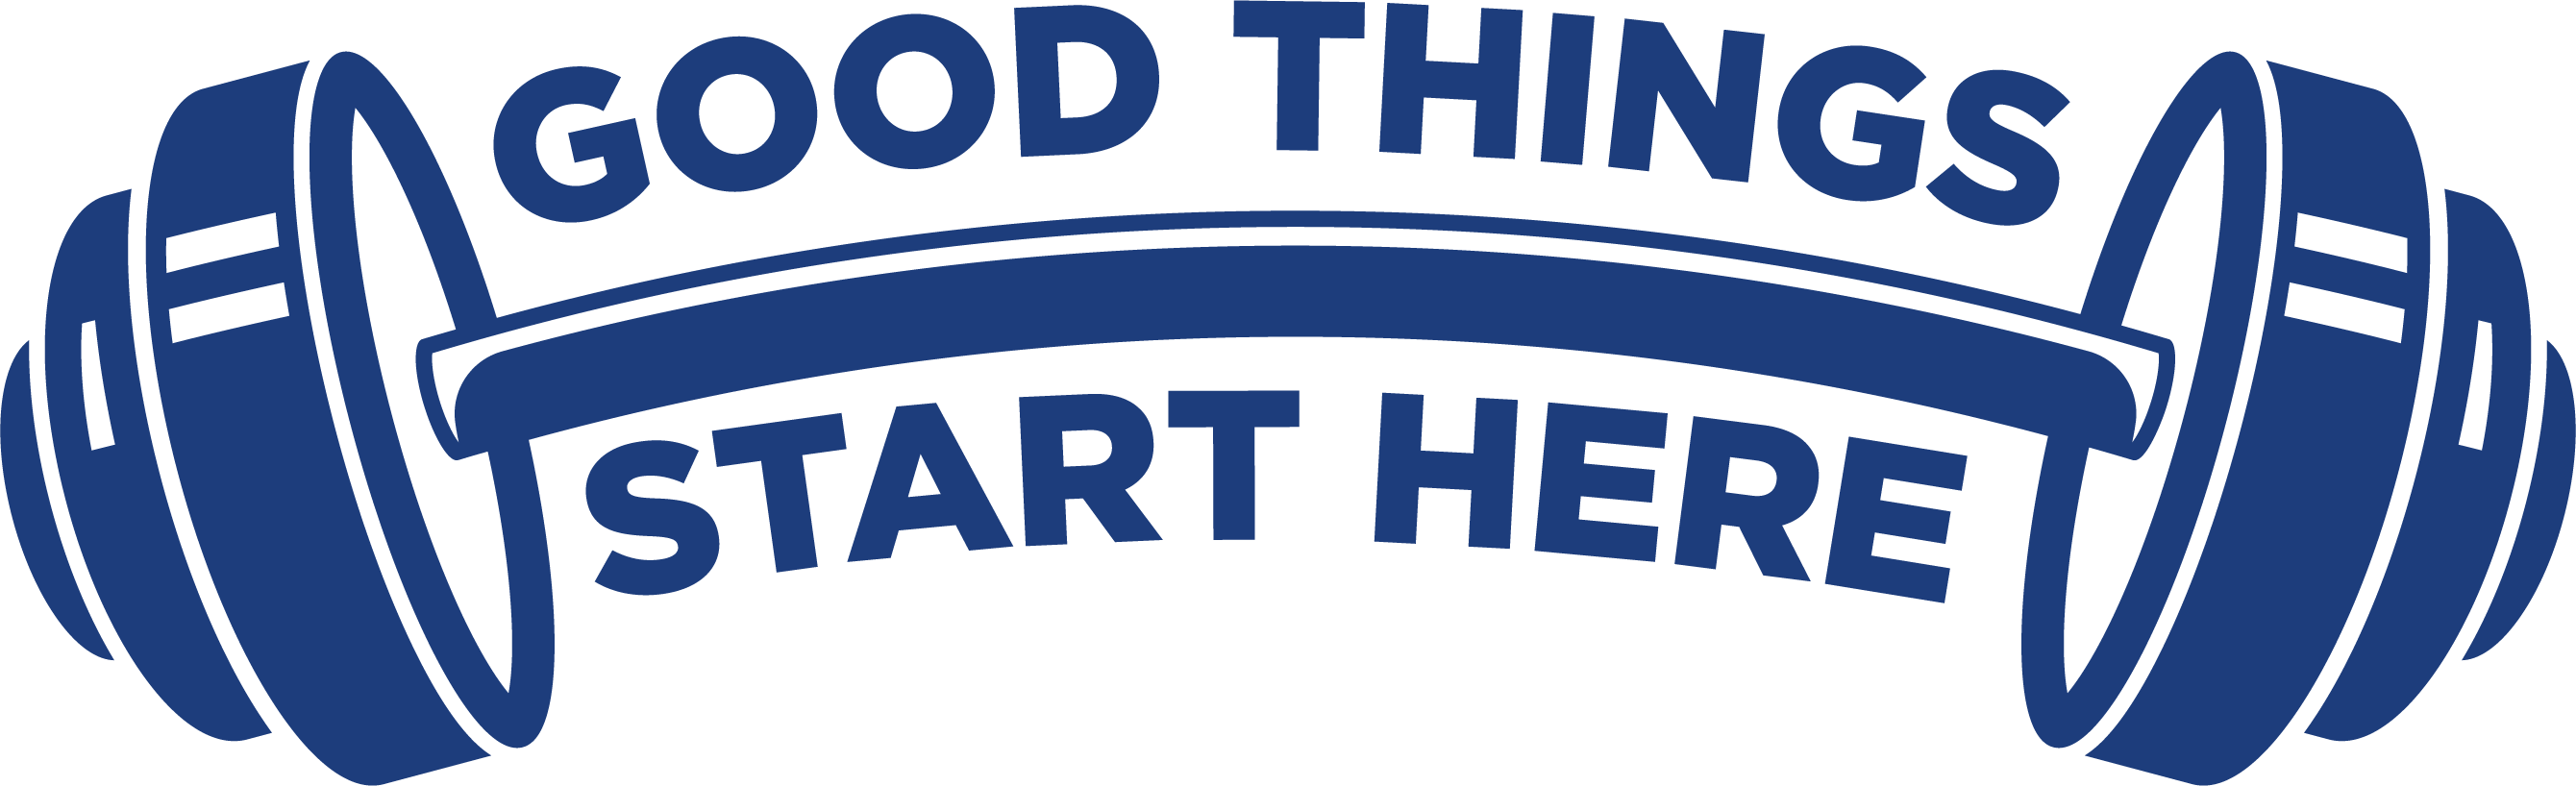 good-things-start-here230660.png